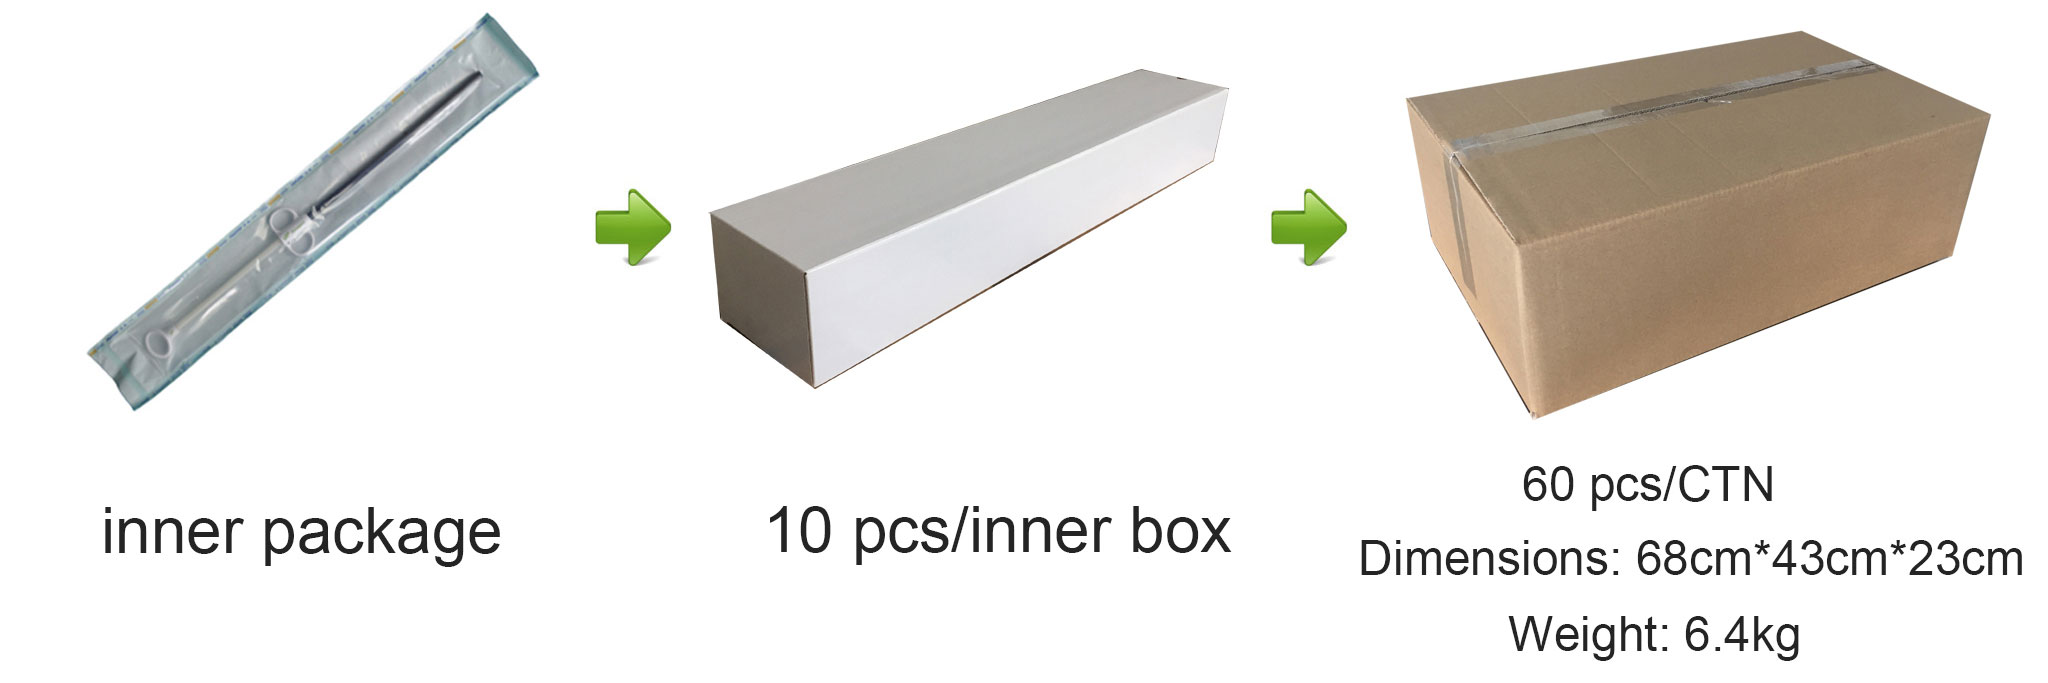 endobag dimensions and weight